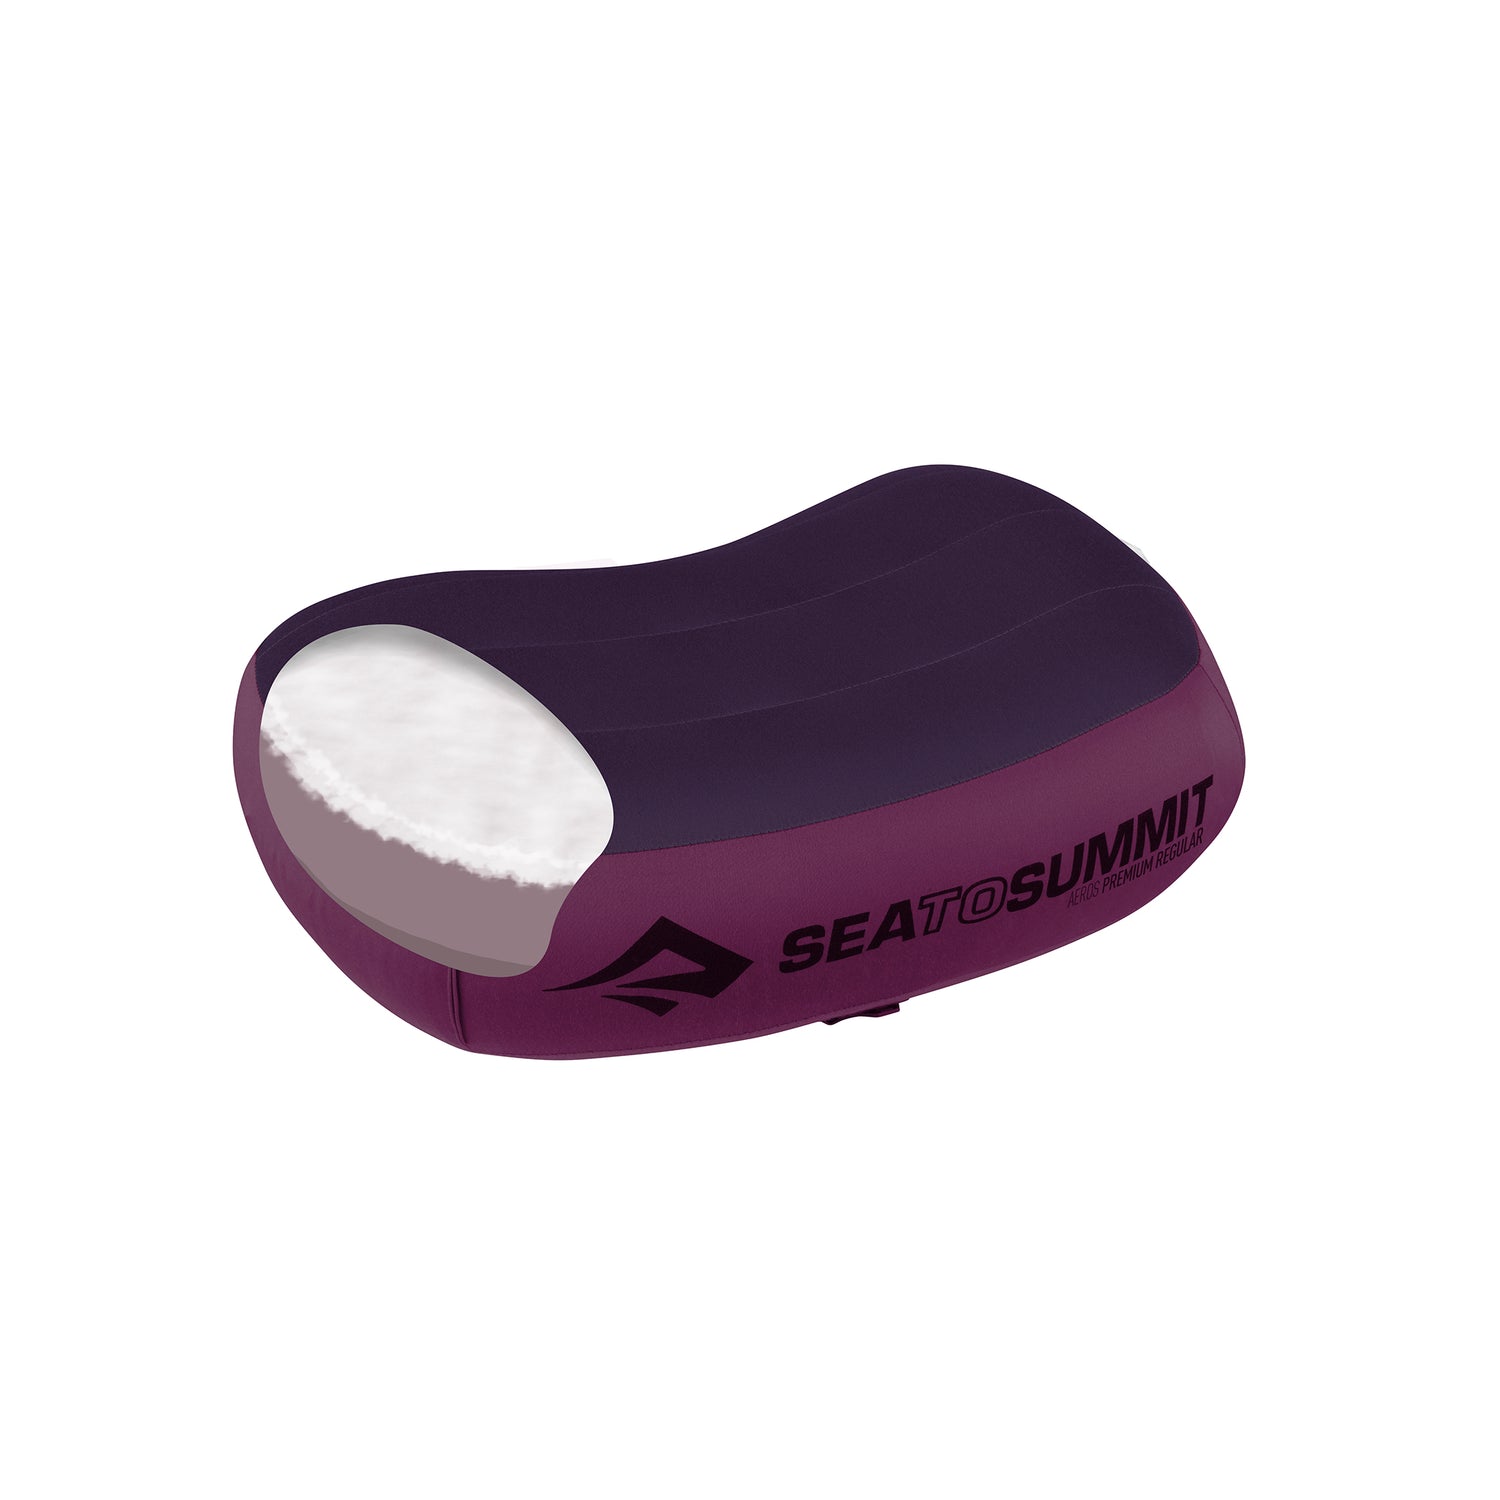 Purple SP-001 Simply Seat Cushion for sale online